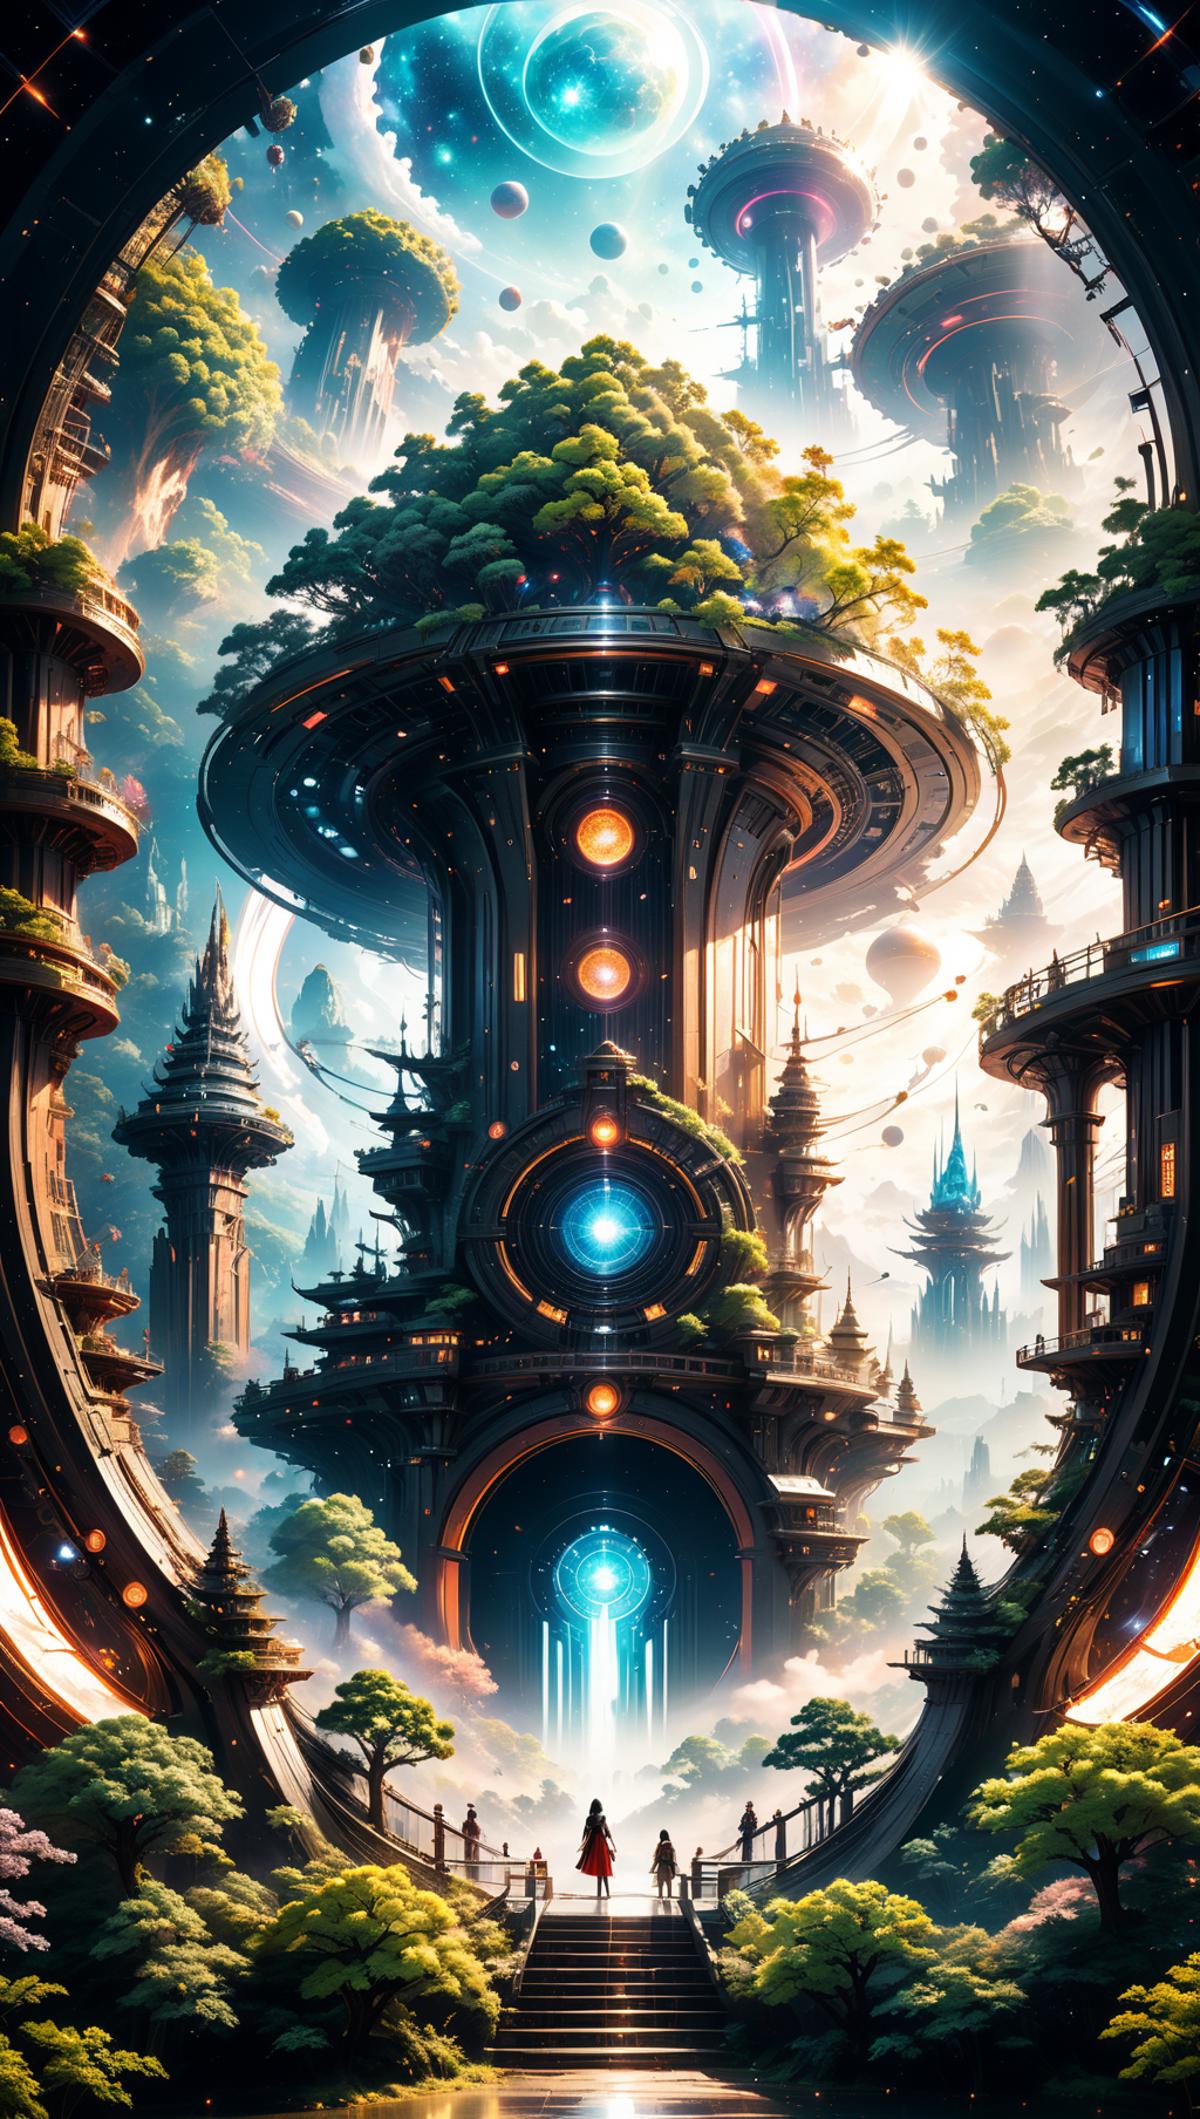 A large, futuristic, cityscape with a variety of towers, buildings, and trees.